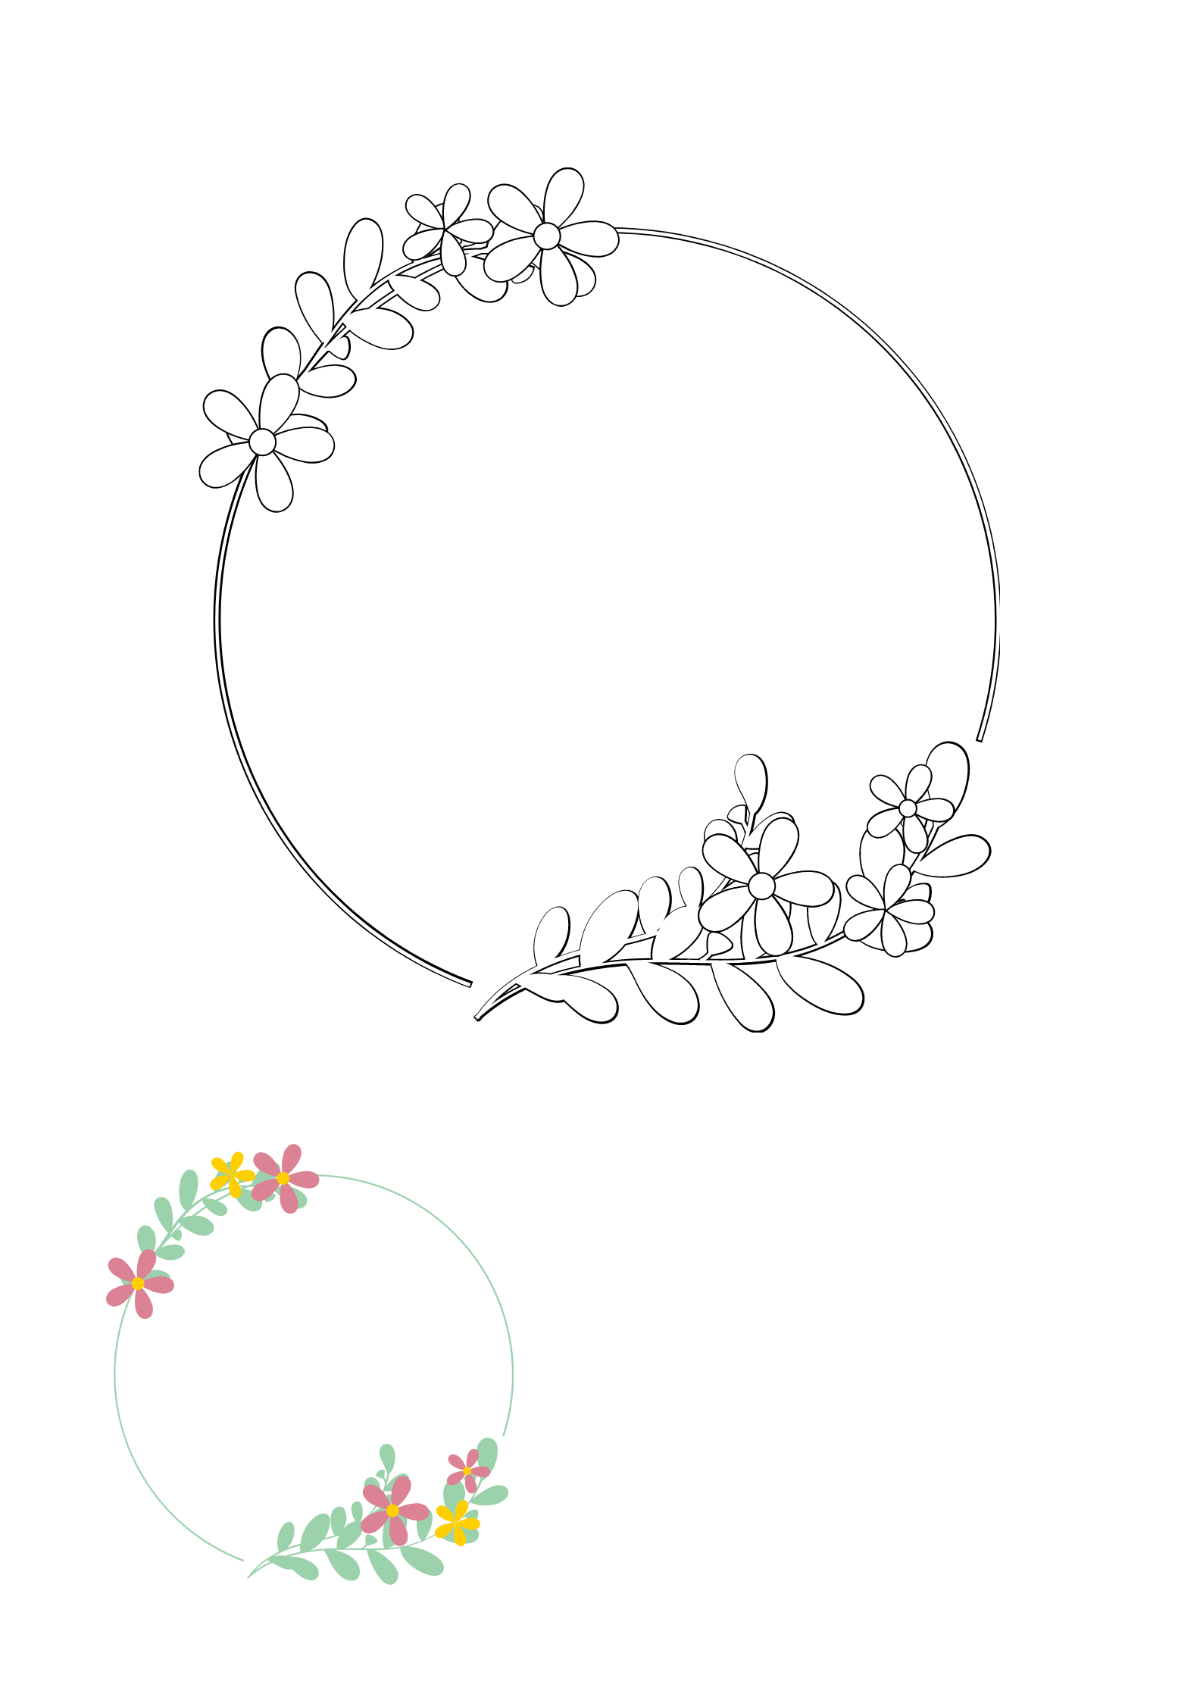 Round Floral Border Coloring Page Template